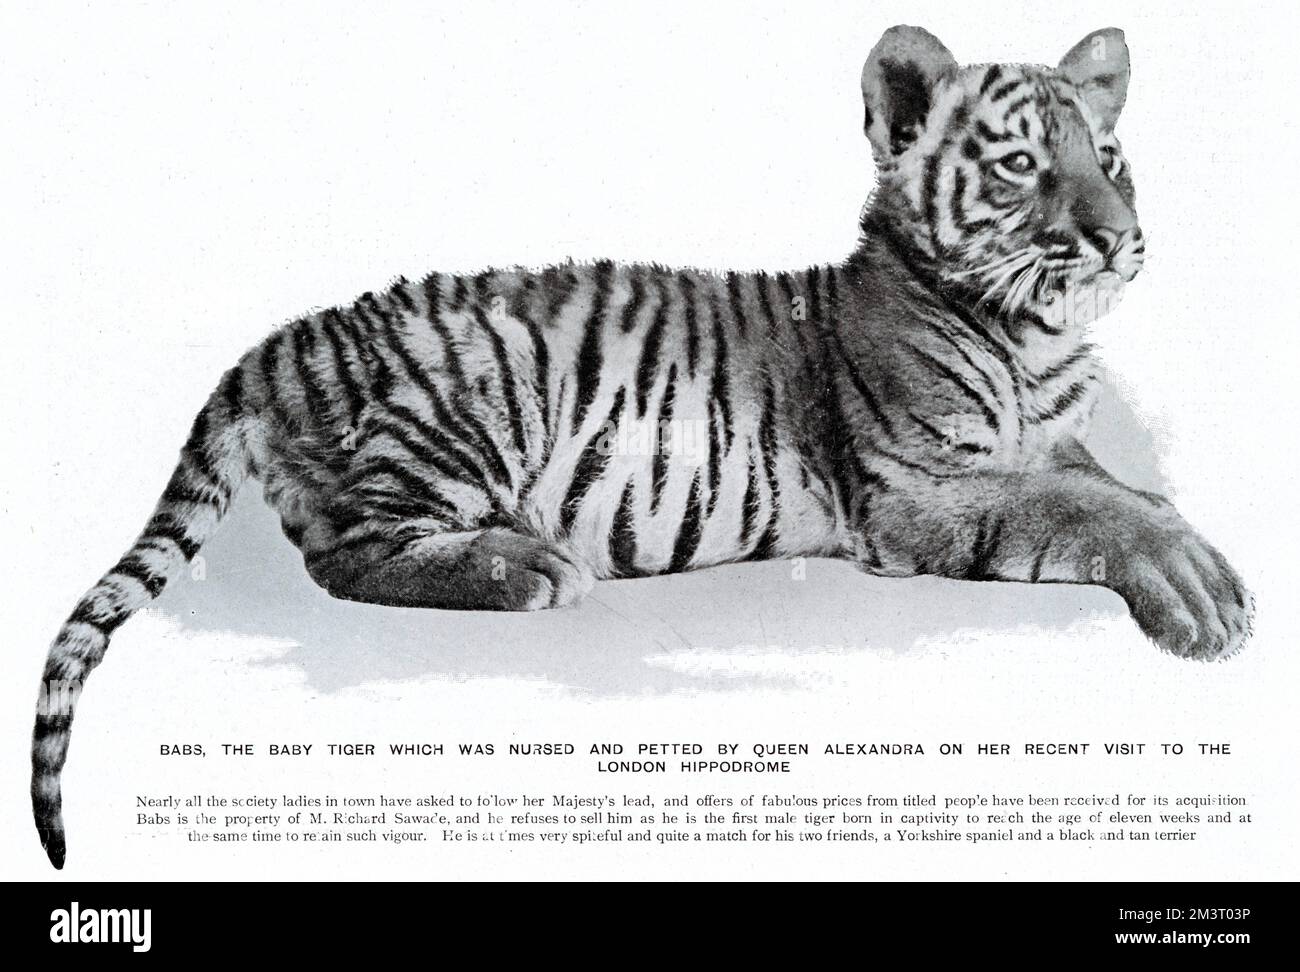 Babs, a male tiger cub bred by Herr Richard Sawade, who was exhibiting his troupe of performing wild animals at the London Hippodrome. Babs was introduced to Queen Alexandra who visited the theatre making him wildly popular.      Date: 1905 Stock Photo